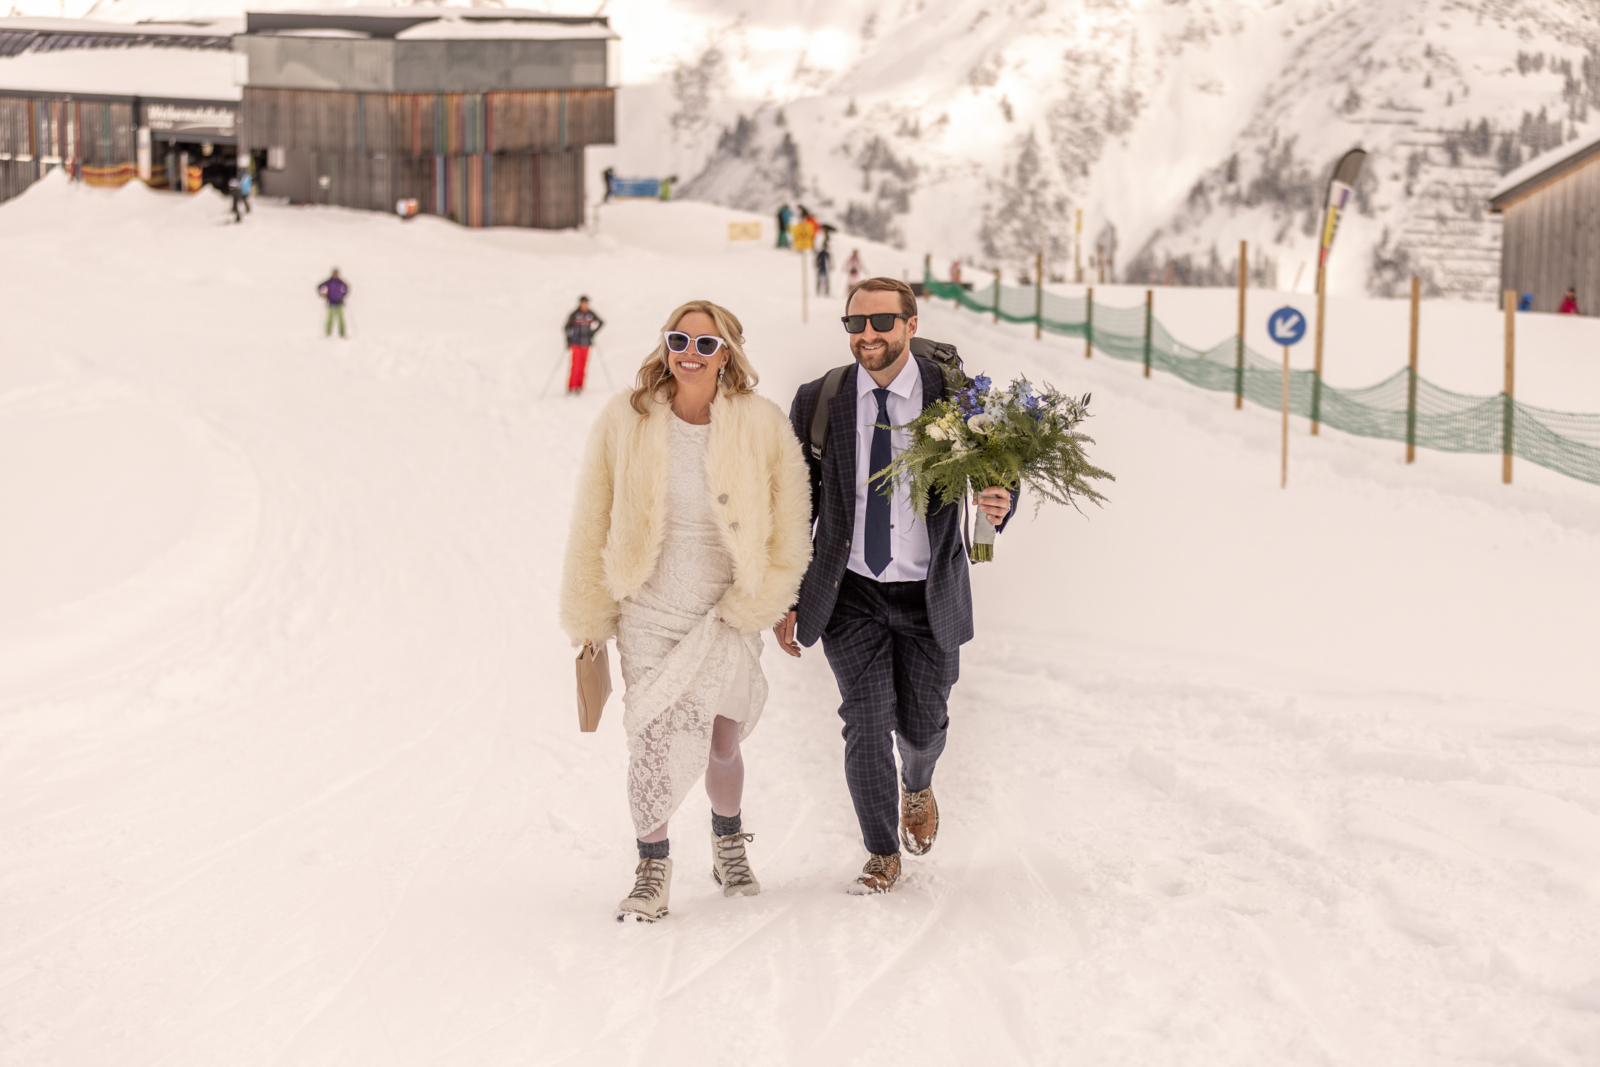 on the way to the wedding ceremony in the snowy mountains